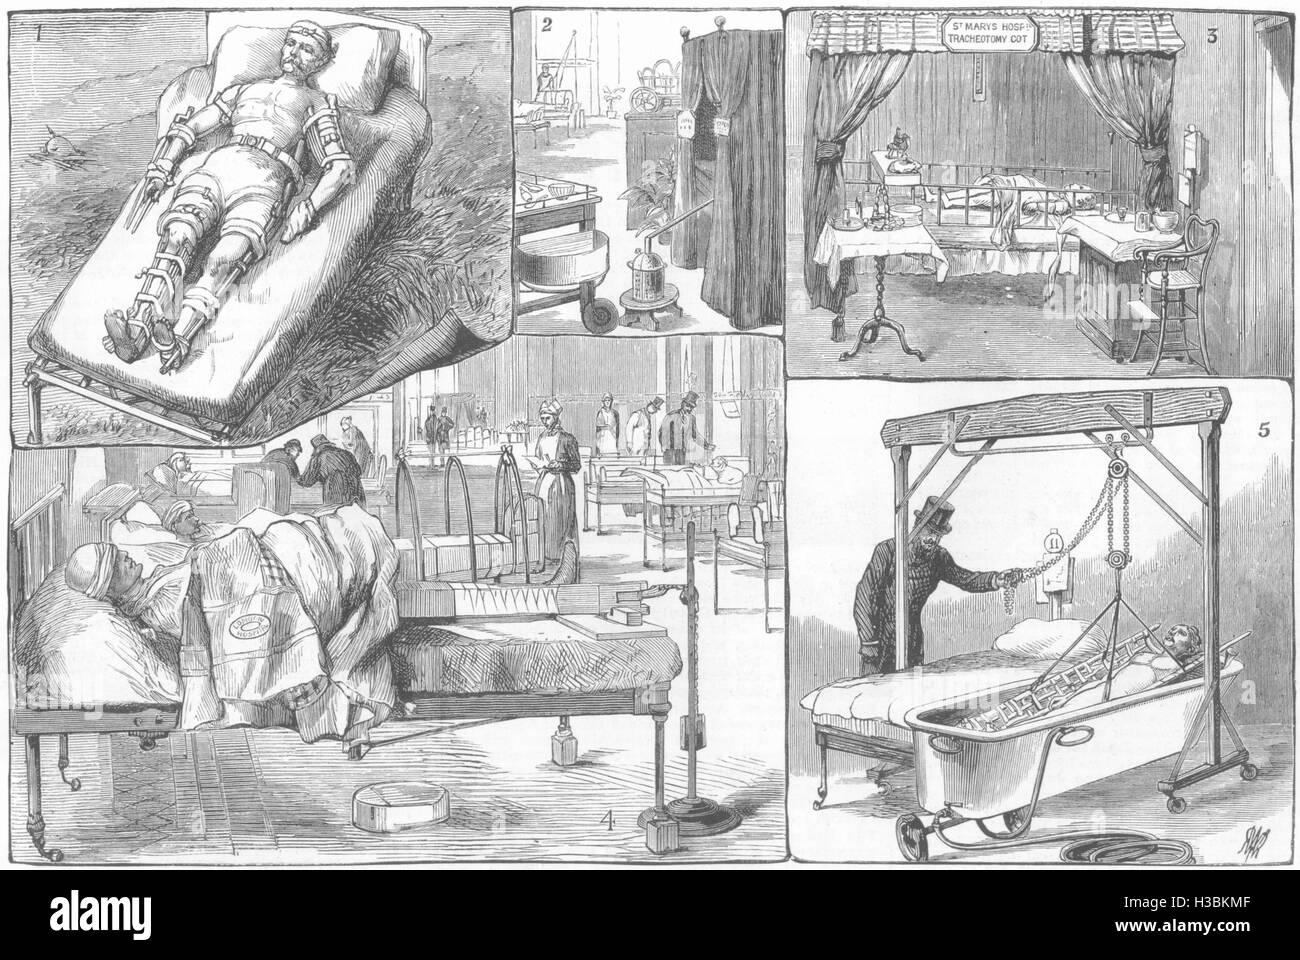 HOSPITALS Extempore dressing;Ward Tent kit Guy's,St Mary's;Bath lift Mddx 1881. The Graphic Stock Photo